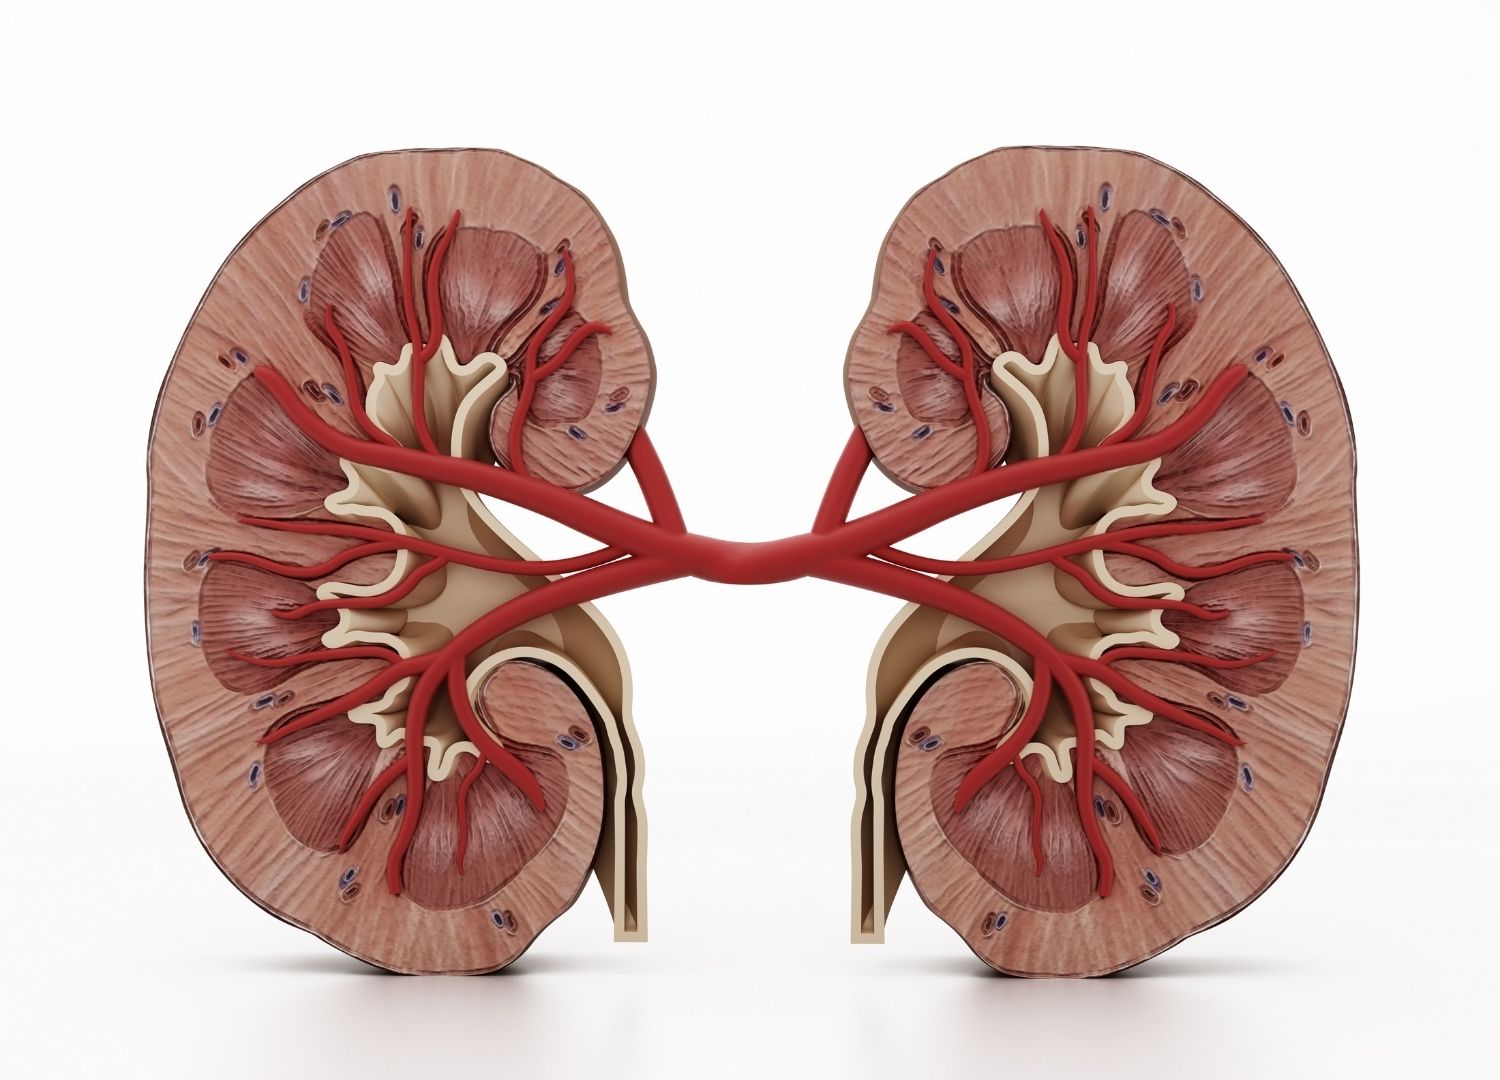 Why is kidney Failure Prevalent in Nigeria?